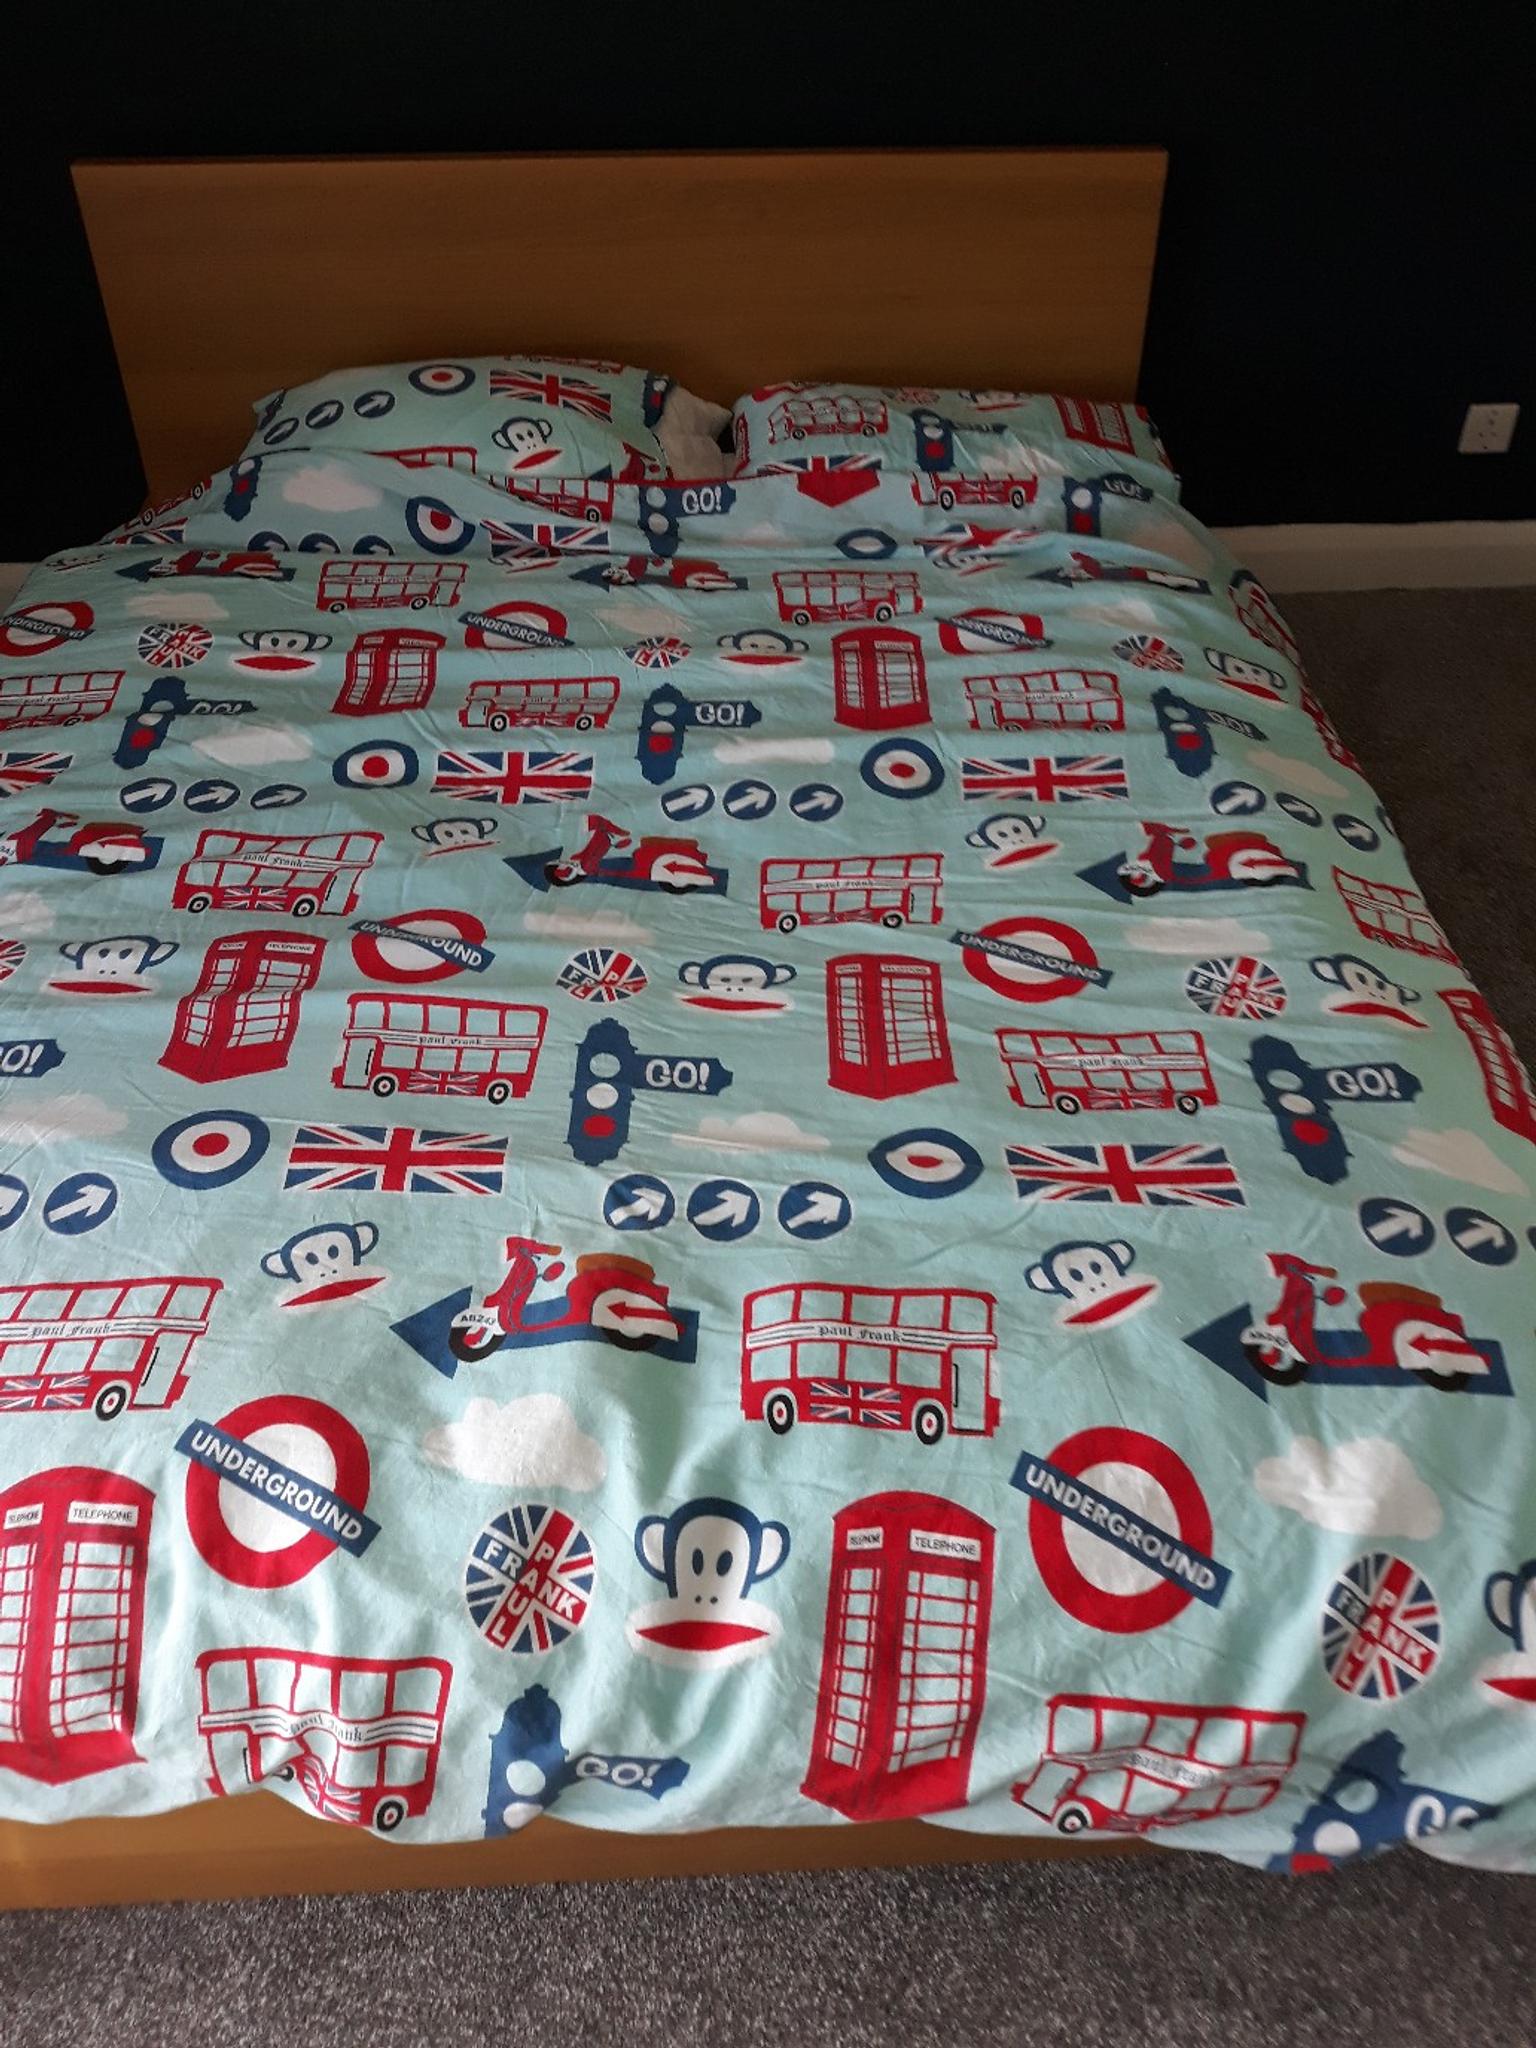 Paul Frank Double Duvet Cover In Sedgefield For 7 00 For Sale